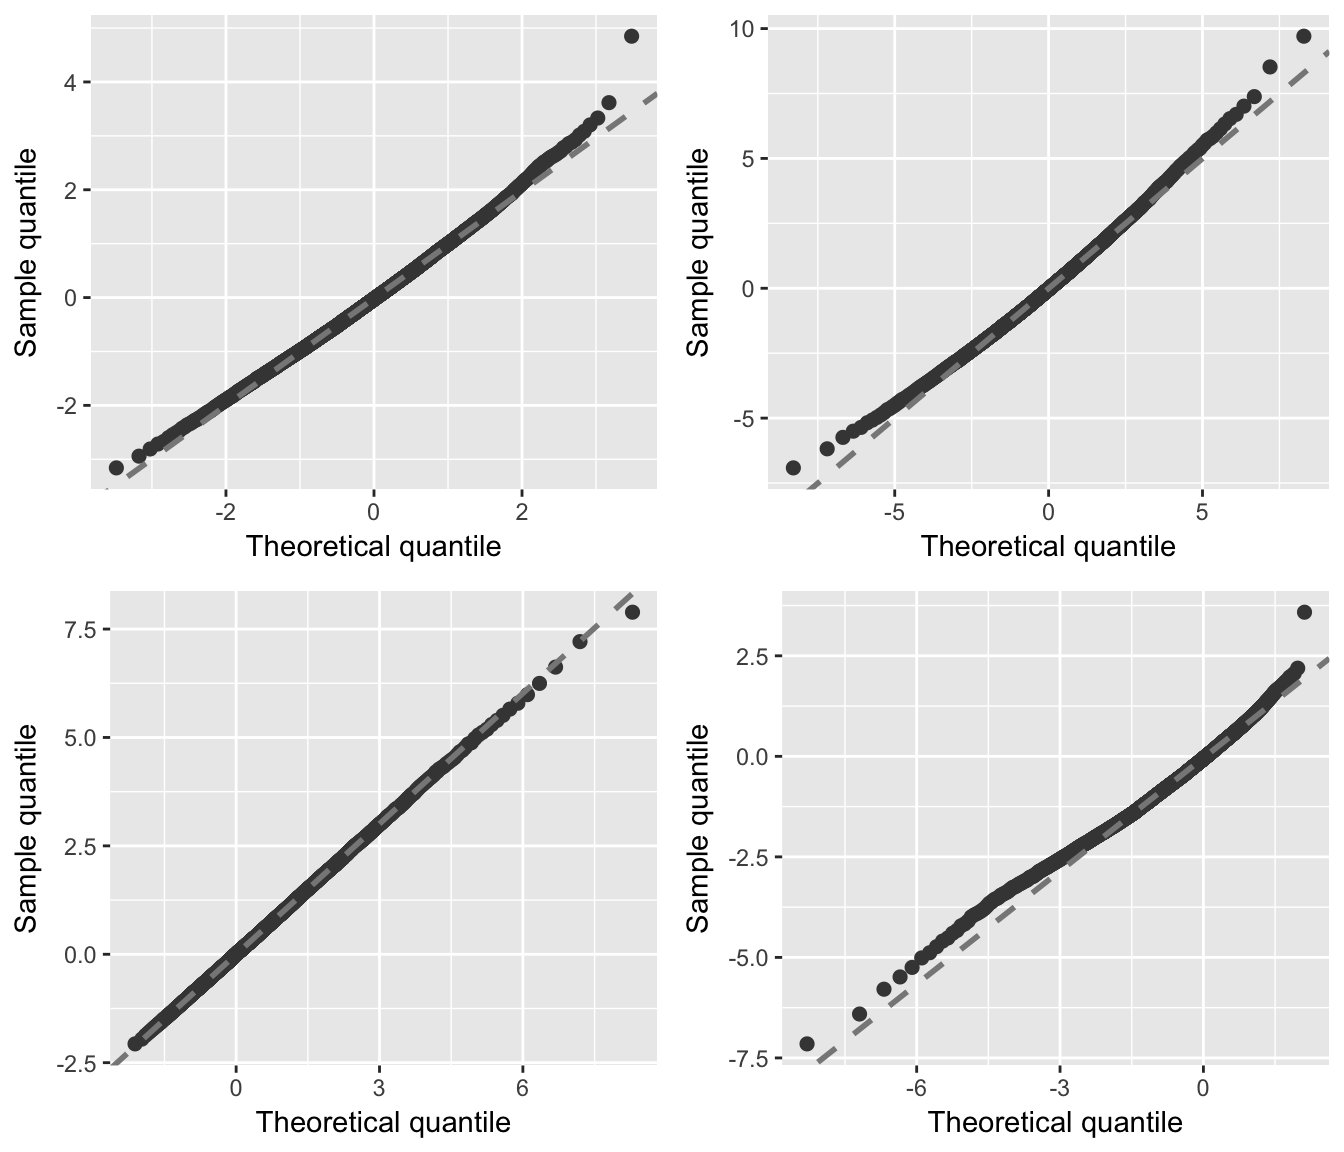 Figure 7: Q-Q plots of the residuals for various cumulative link models fit to simulated data with Gumbel (max) errors. Top left: A model with probit link. Top right: A model with logit link. Bottom left: A model with log-log link (i.e., the correct model). Bottom right: A model with complementary log-log link.